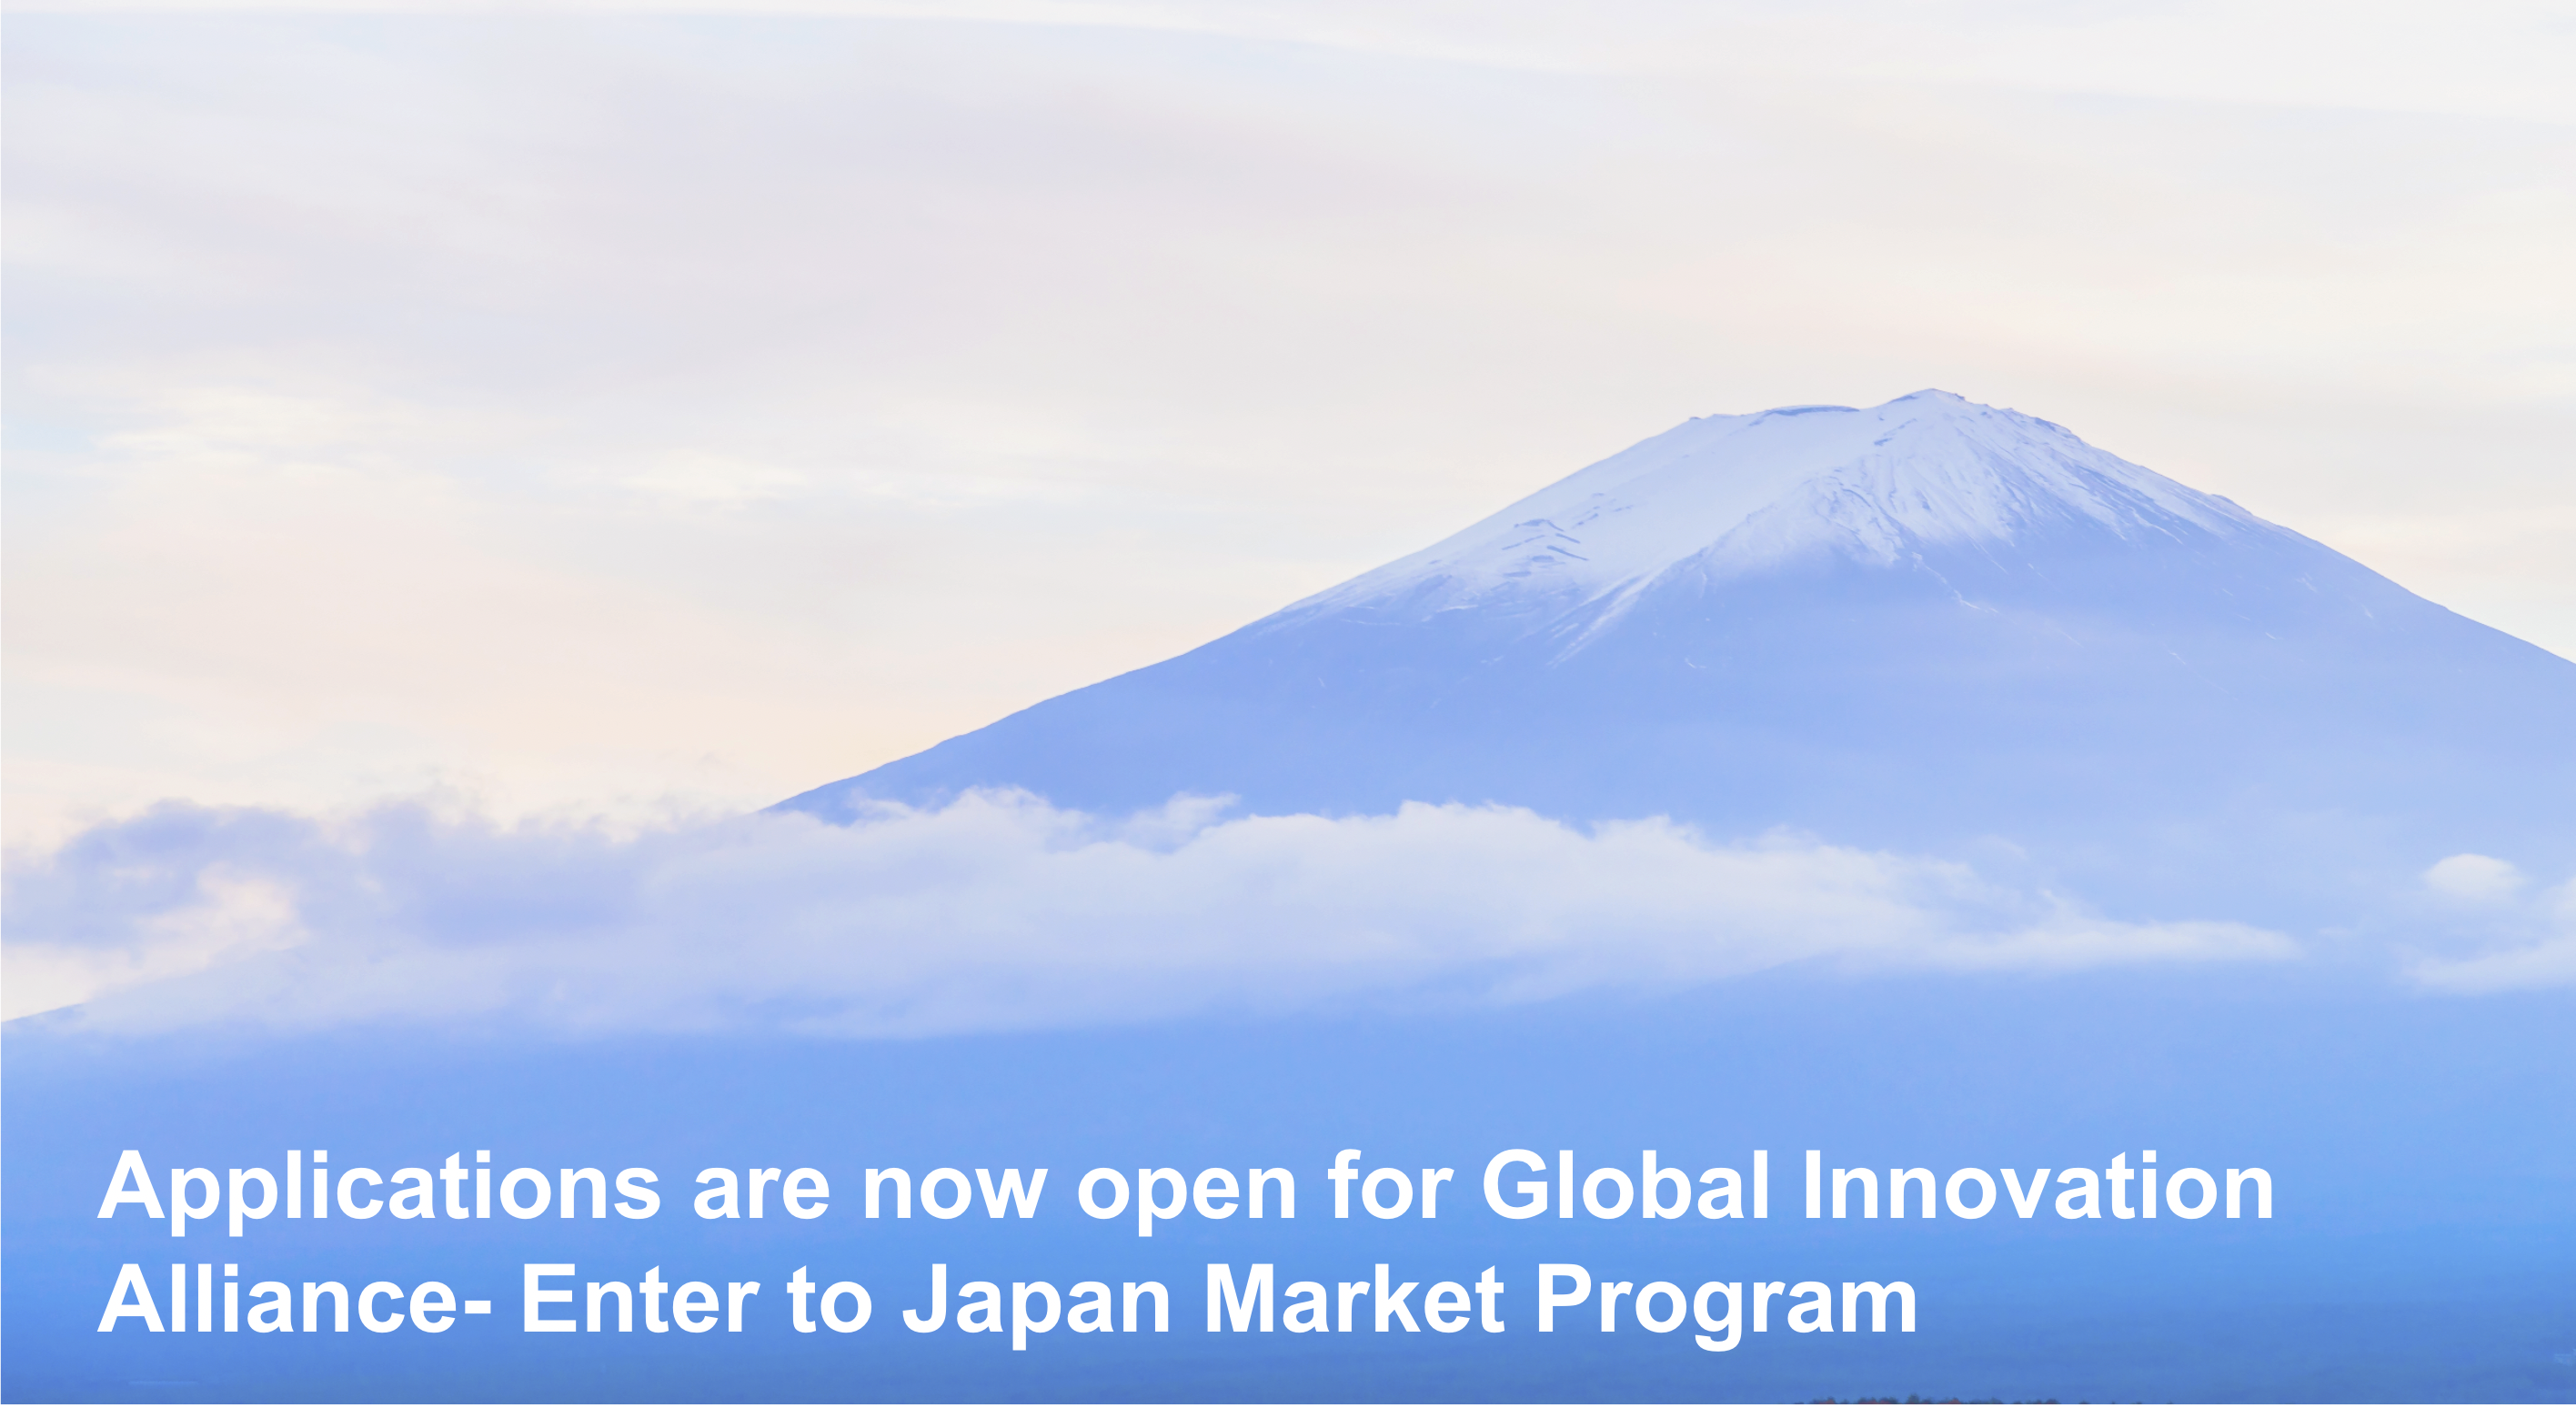 [Announcement] – Applications are open for the GIA- Enter to Japan Market Program